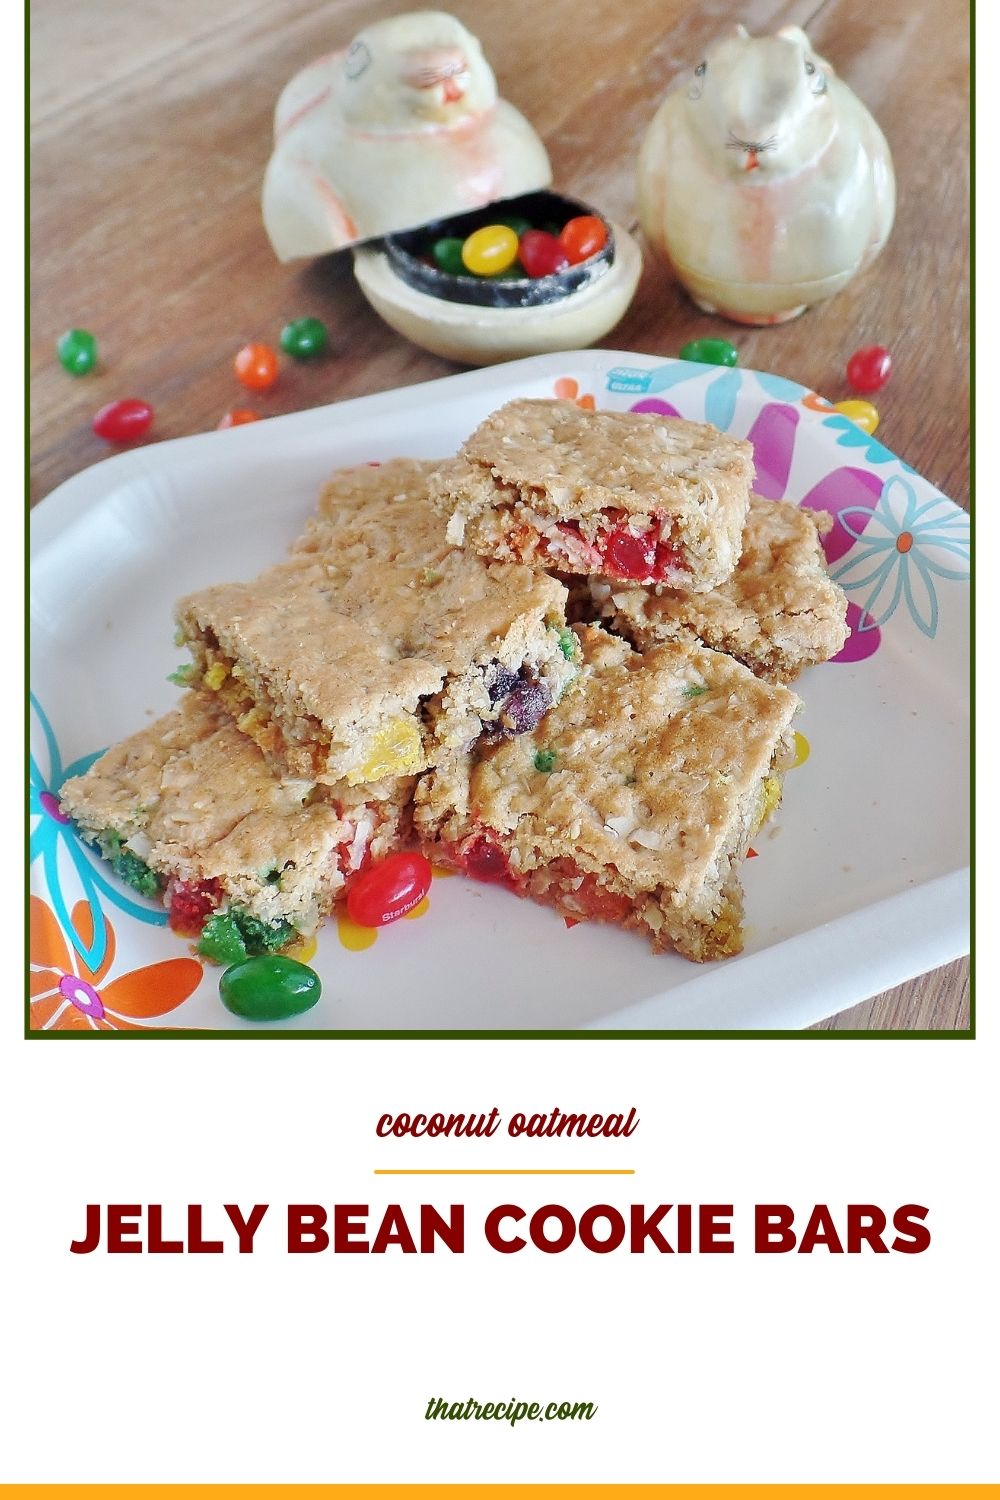 cookie bars on a plate with bunny shaped candy dishes and text overlay "coconut oatmeal jelly bean cookies"